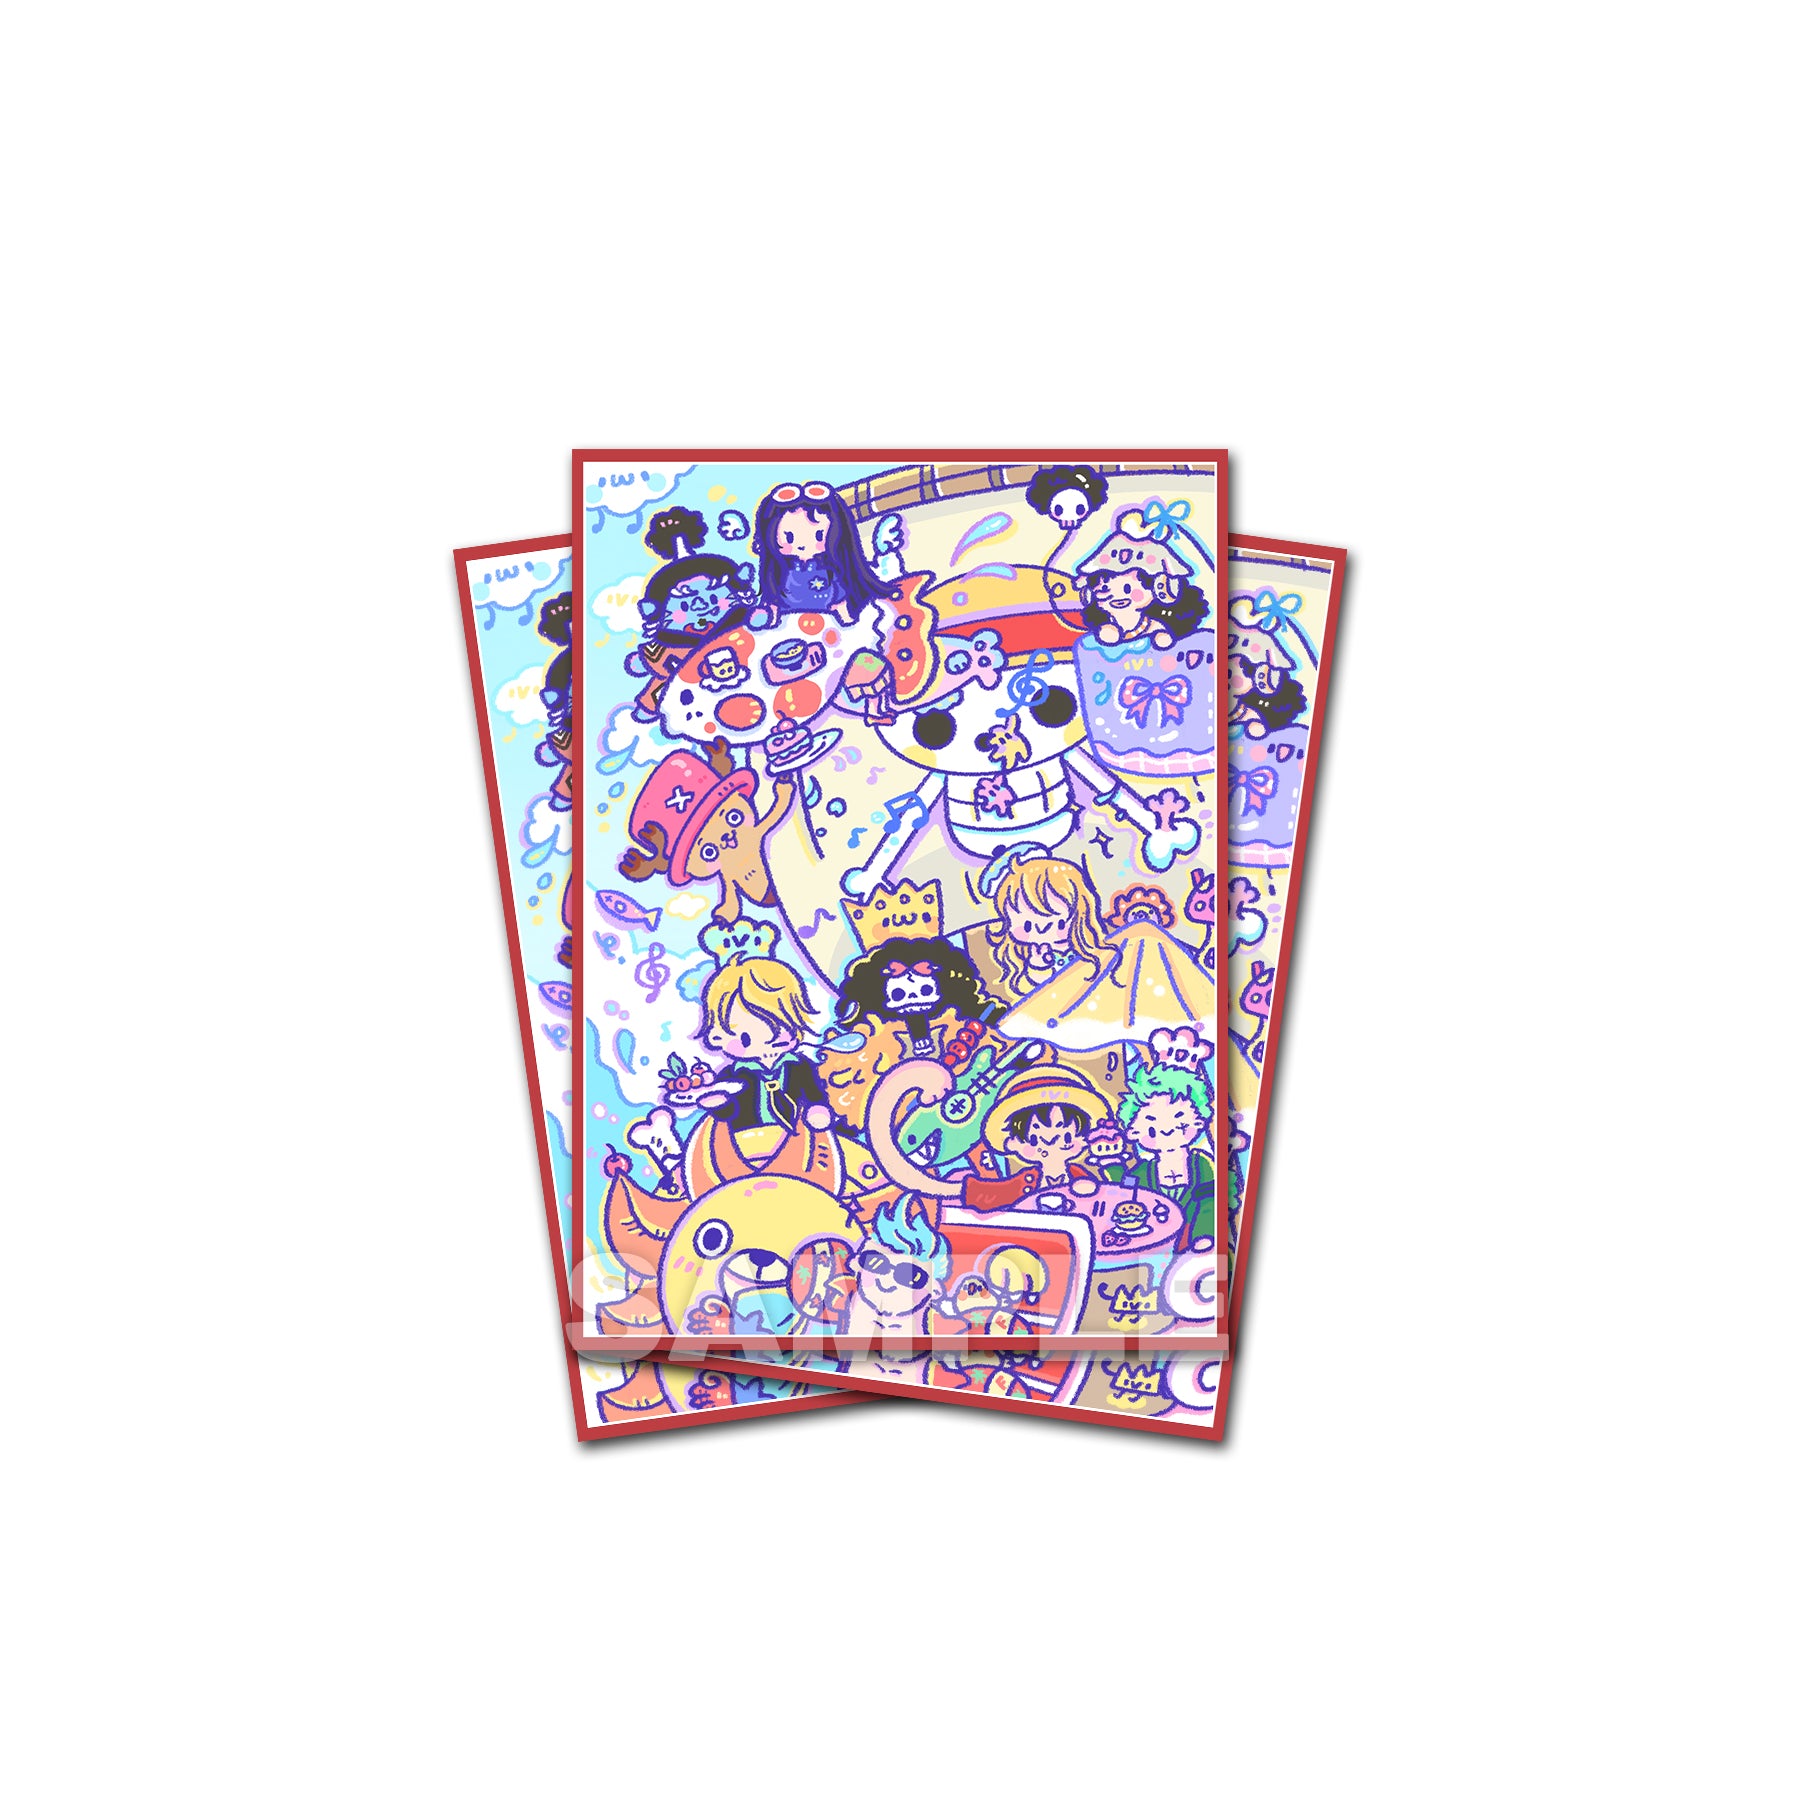 Adorable Straw Hat Pirates Standard Size Card Sleeves